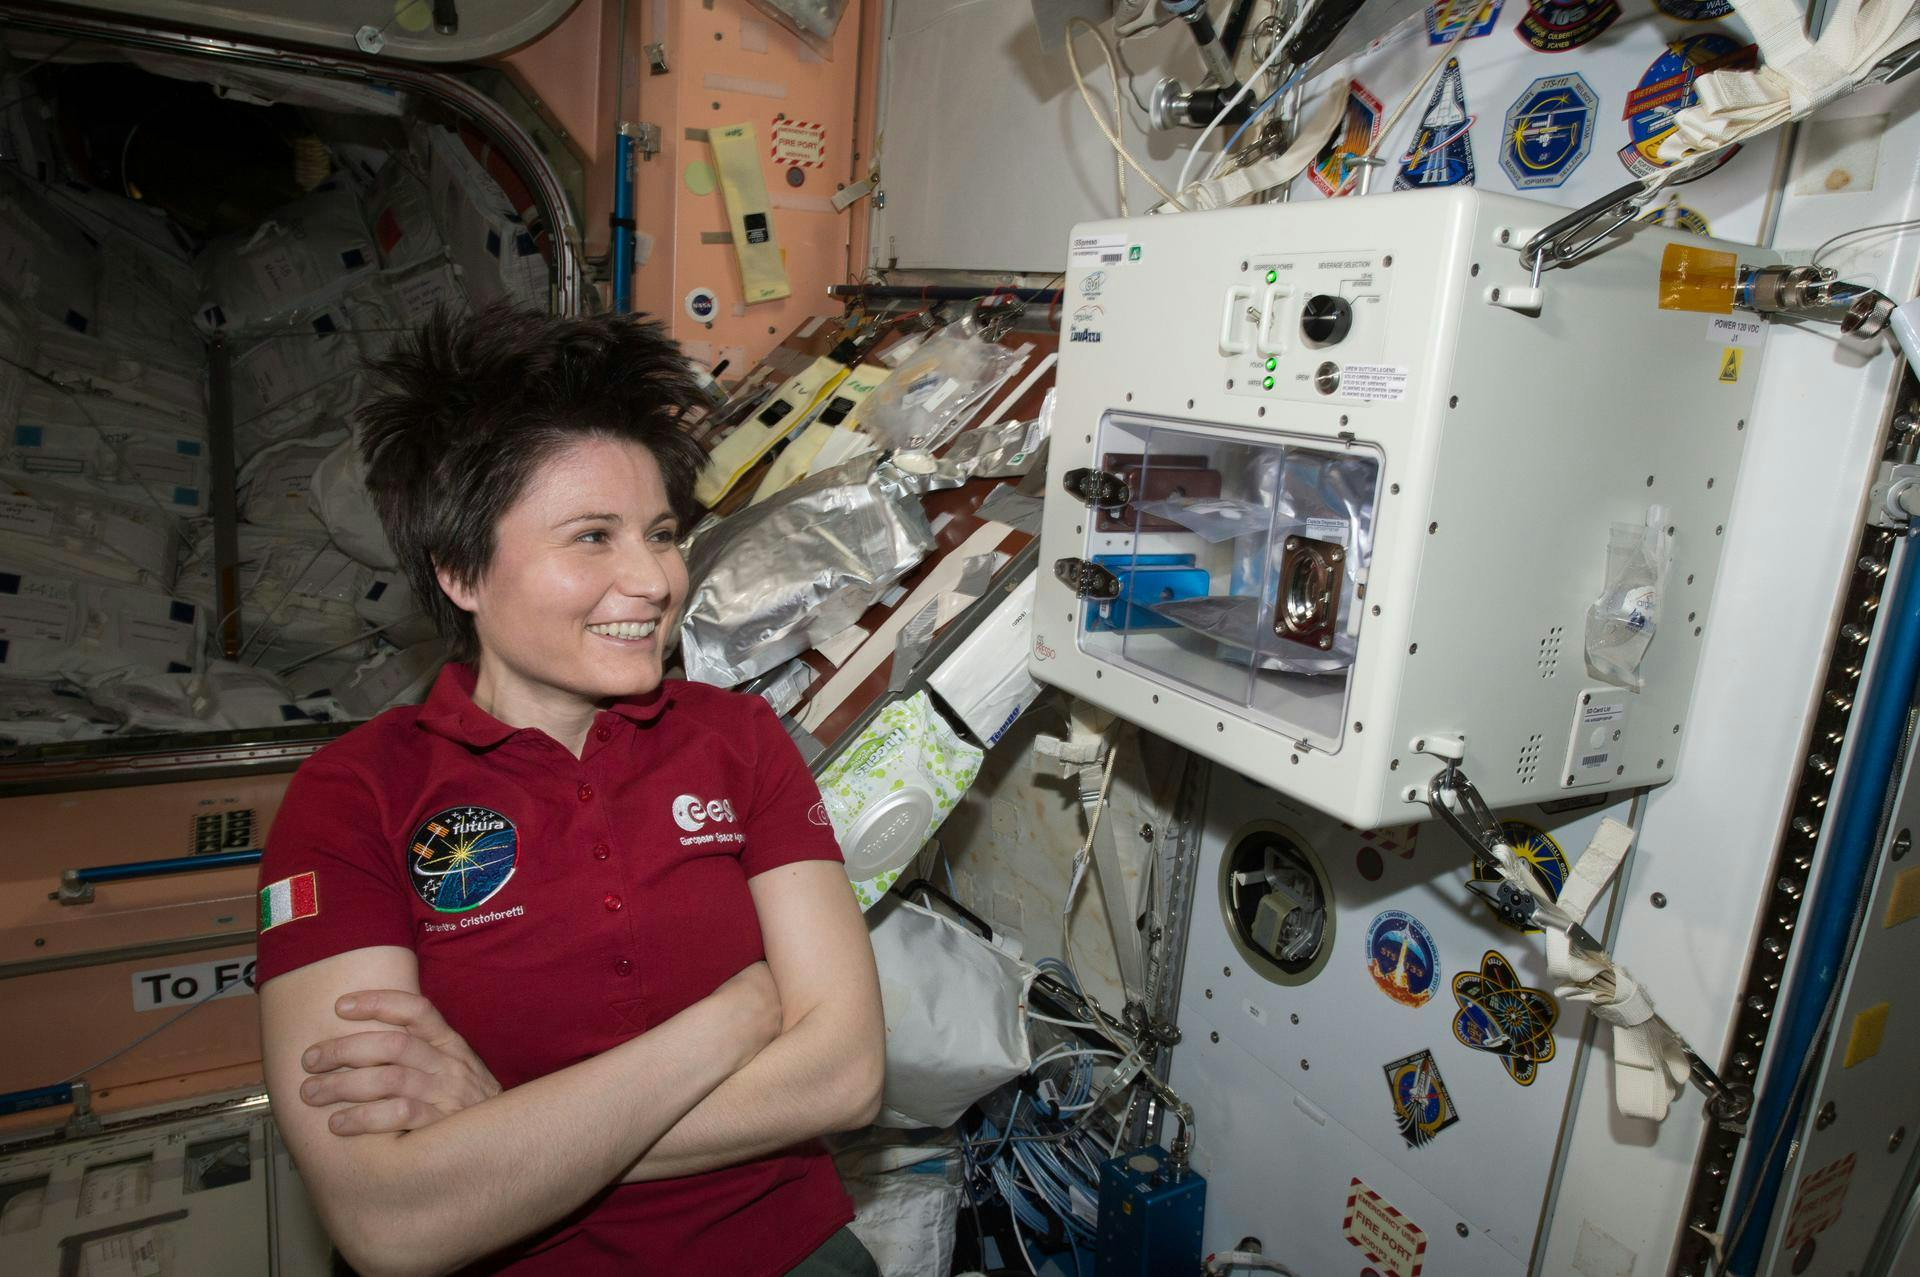 ESA (European Space Agency) astronaut Samantha Cristoforetti waits next to the newly installed ISSpresso machine. The espresso device allows crews to make tea, coffee, broth, or other hot beverages they might enjoy.